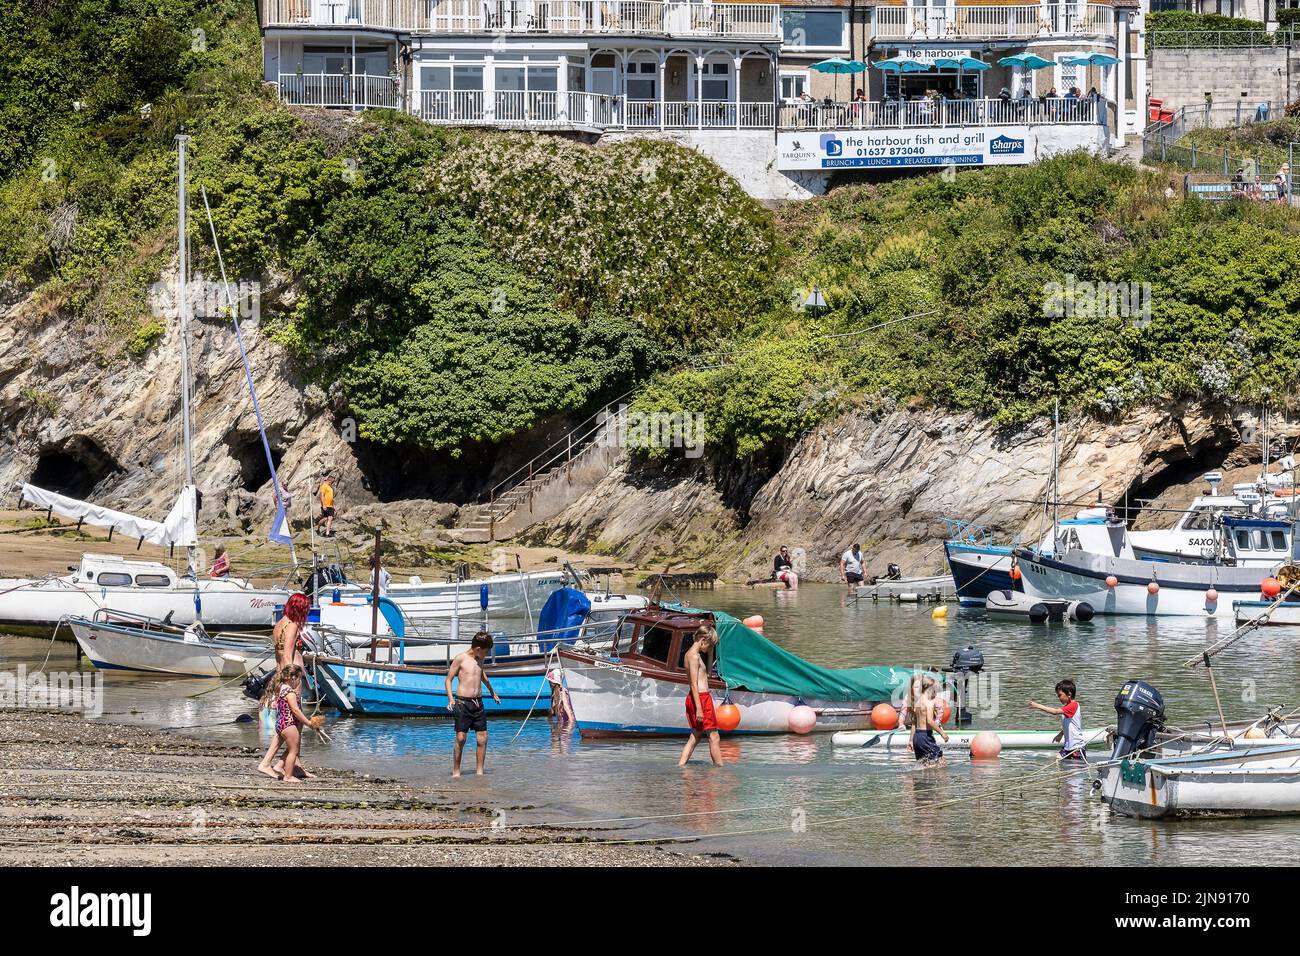 Fishing boats and Sailboats moored in the picturesque Newquay Harbour in Cornwall in England in the UK. Stock Photo